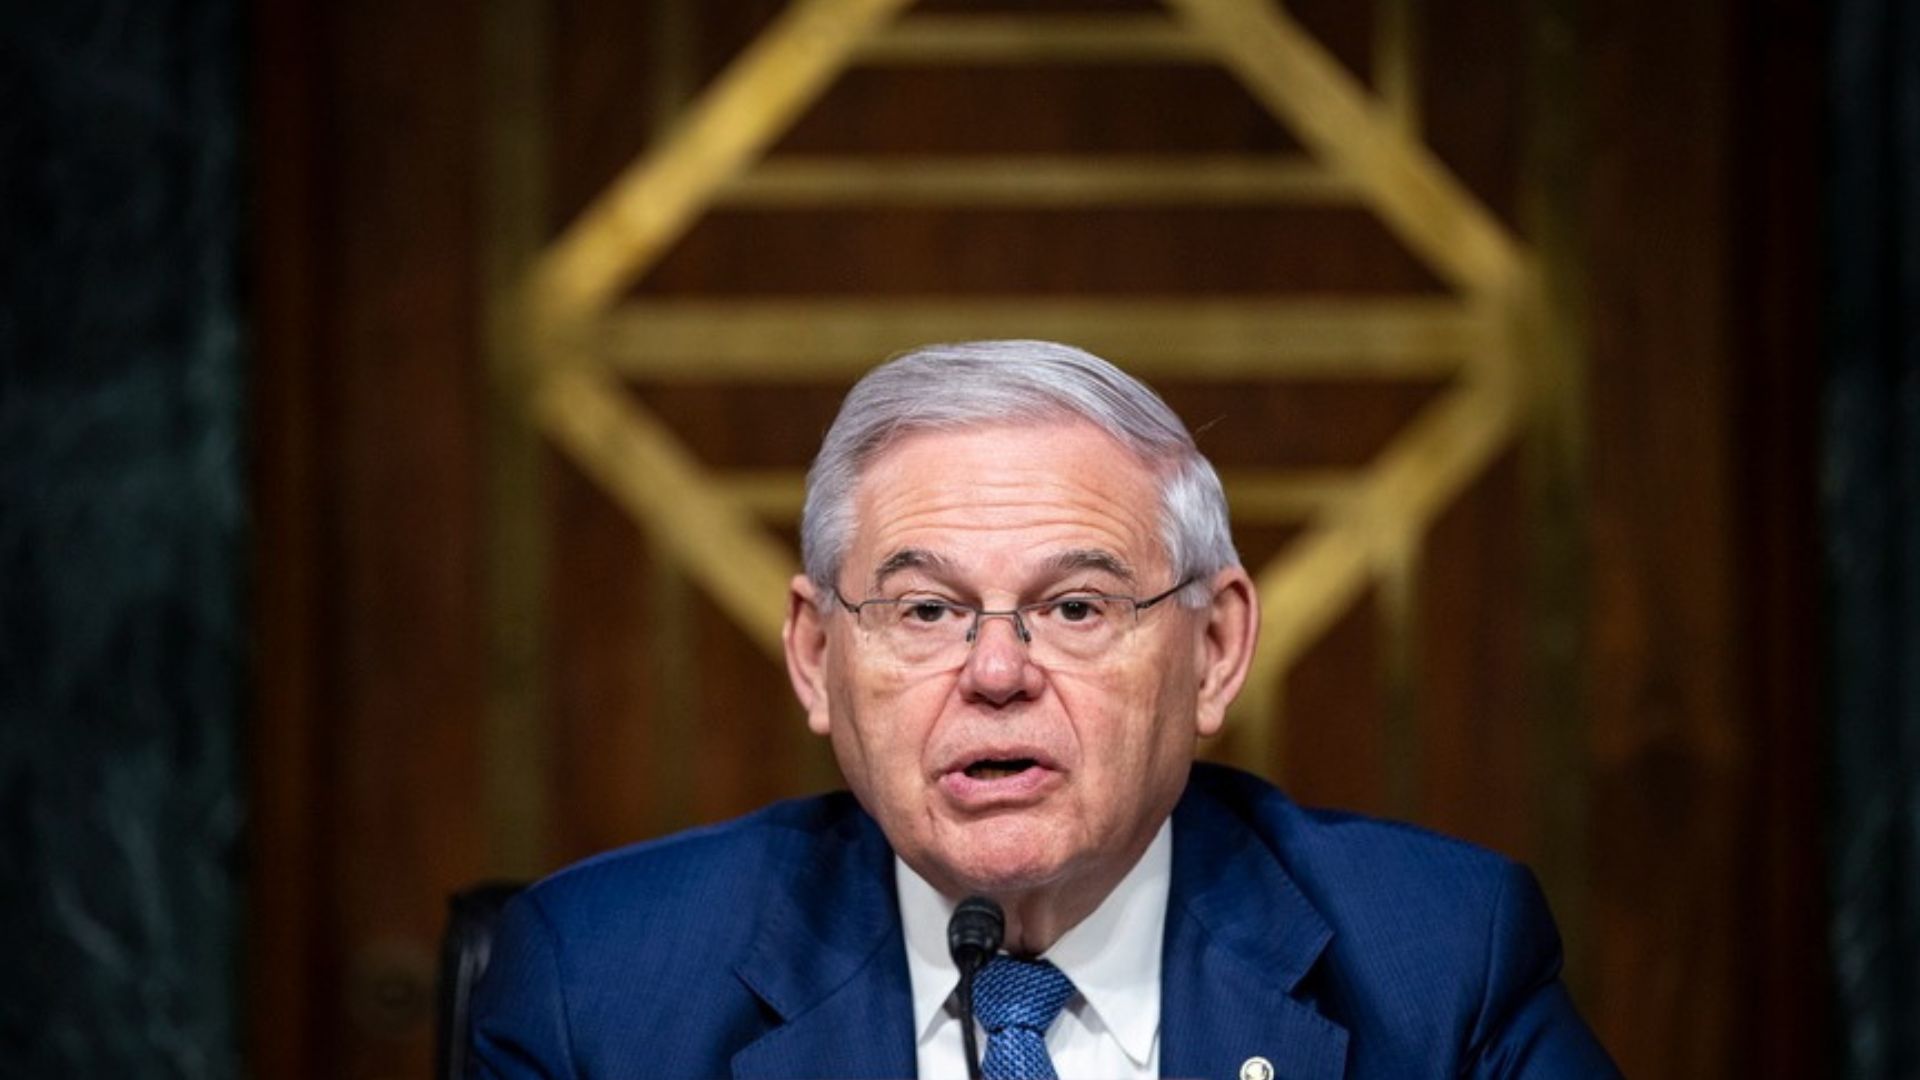 Menendez and his wife are accused of corruption